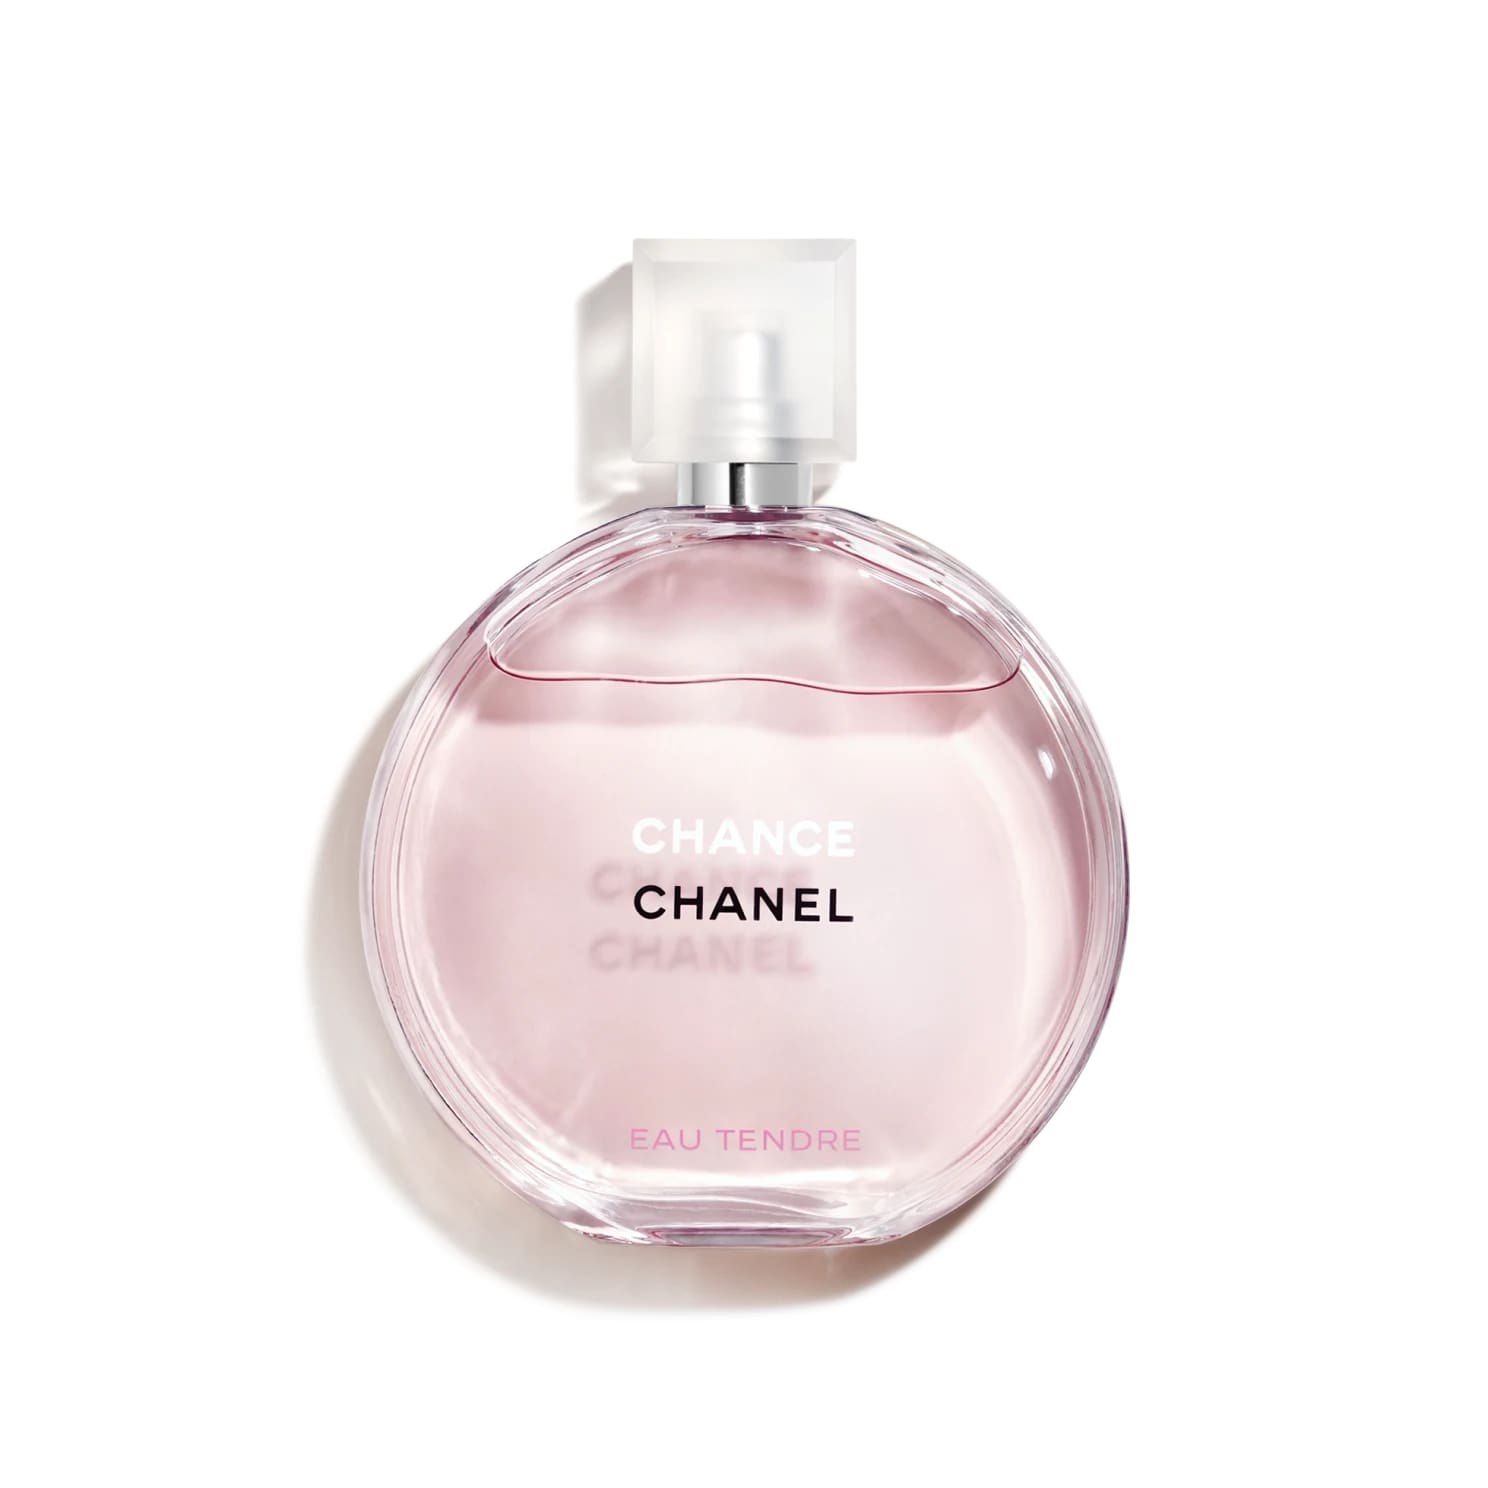 Chance Eau Tendre Perfume EDT Spay for Women by Chanel